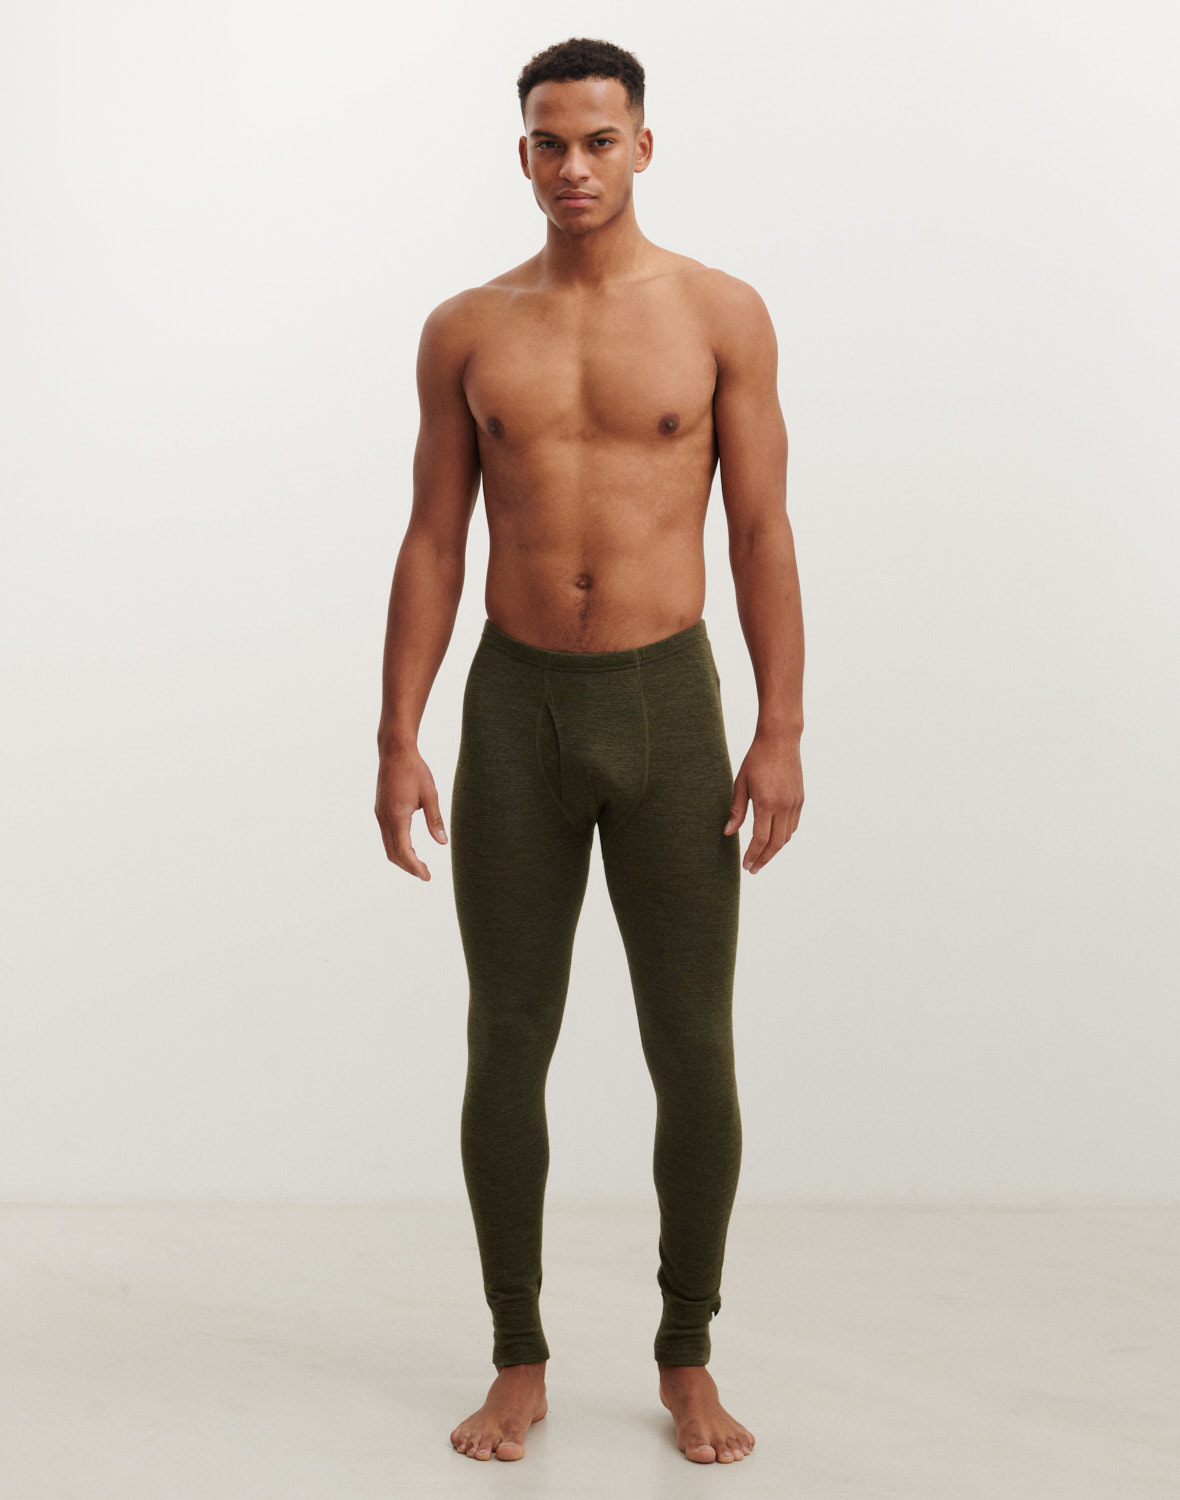 Men's merino wool long johns with fly - Silver sage - Dilling